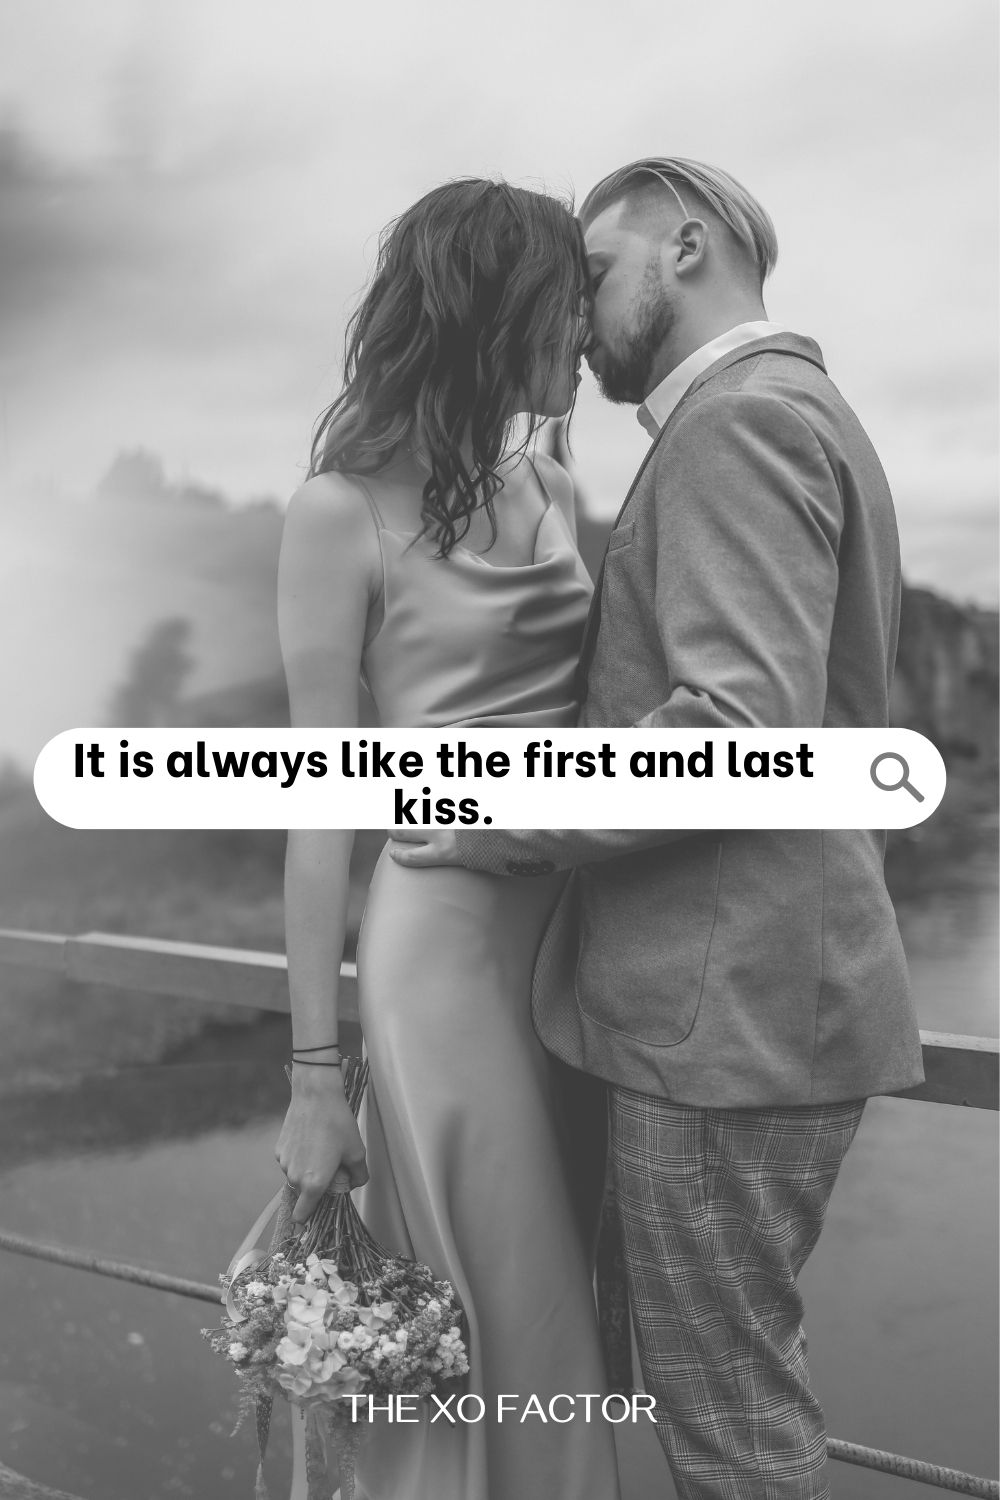 It is always like the first and last kiss.